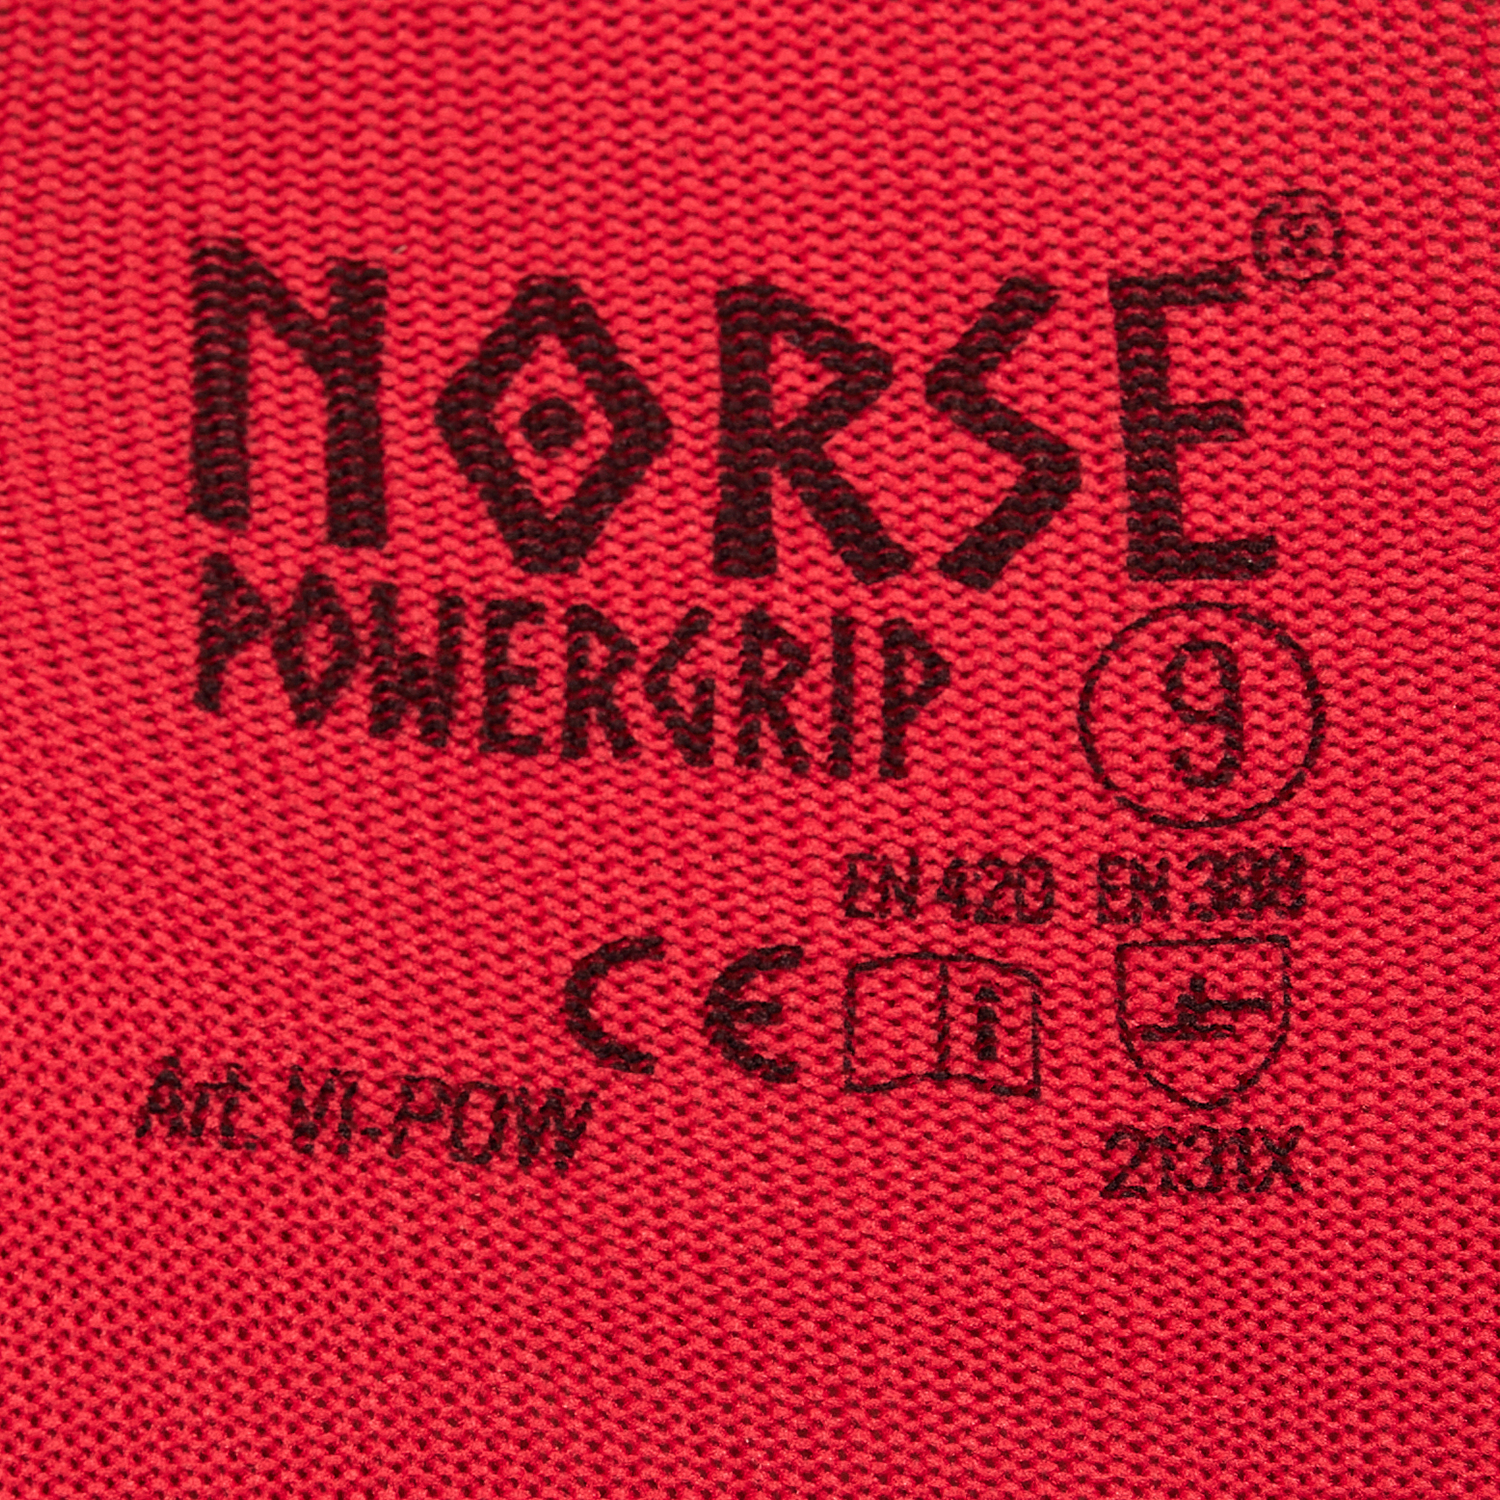 NORSE PowerGrip assembly gloves size 10